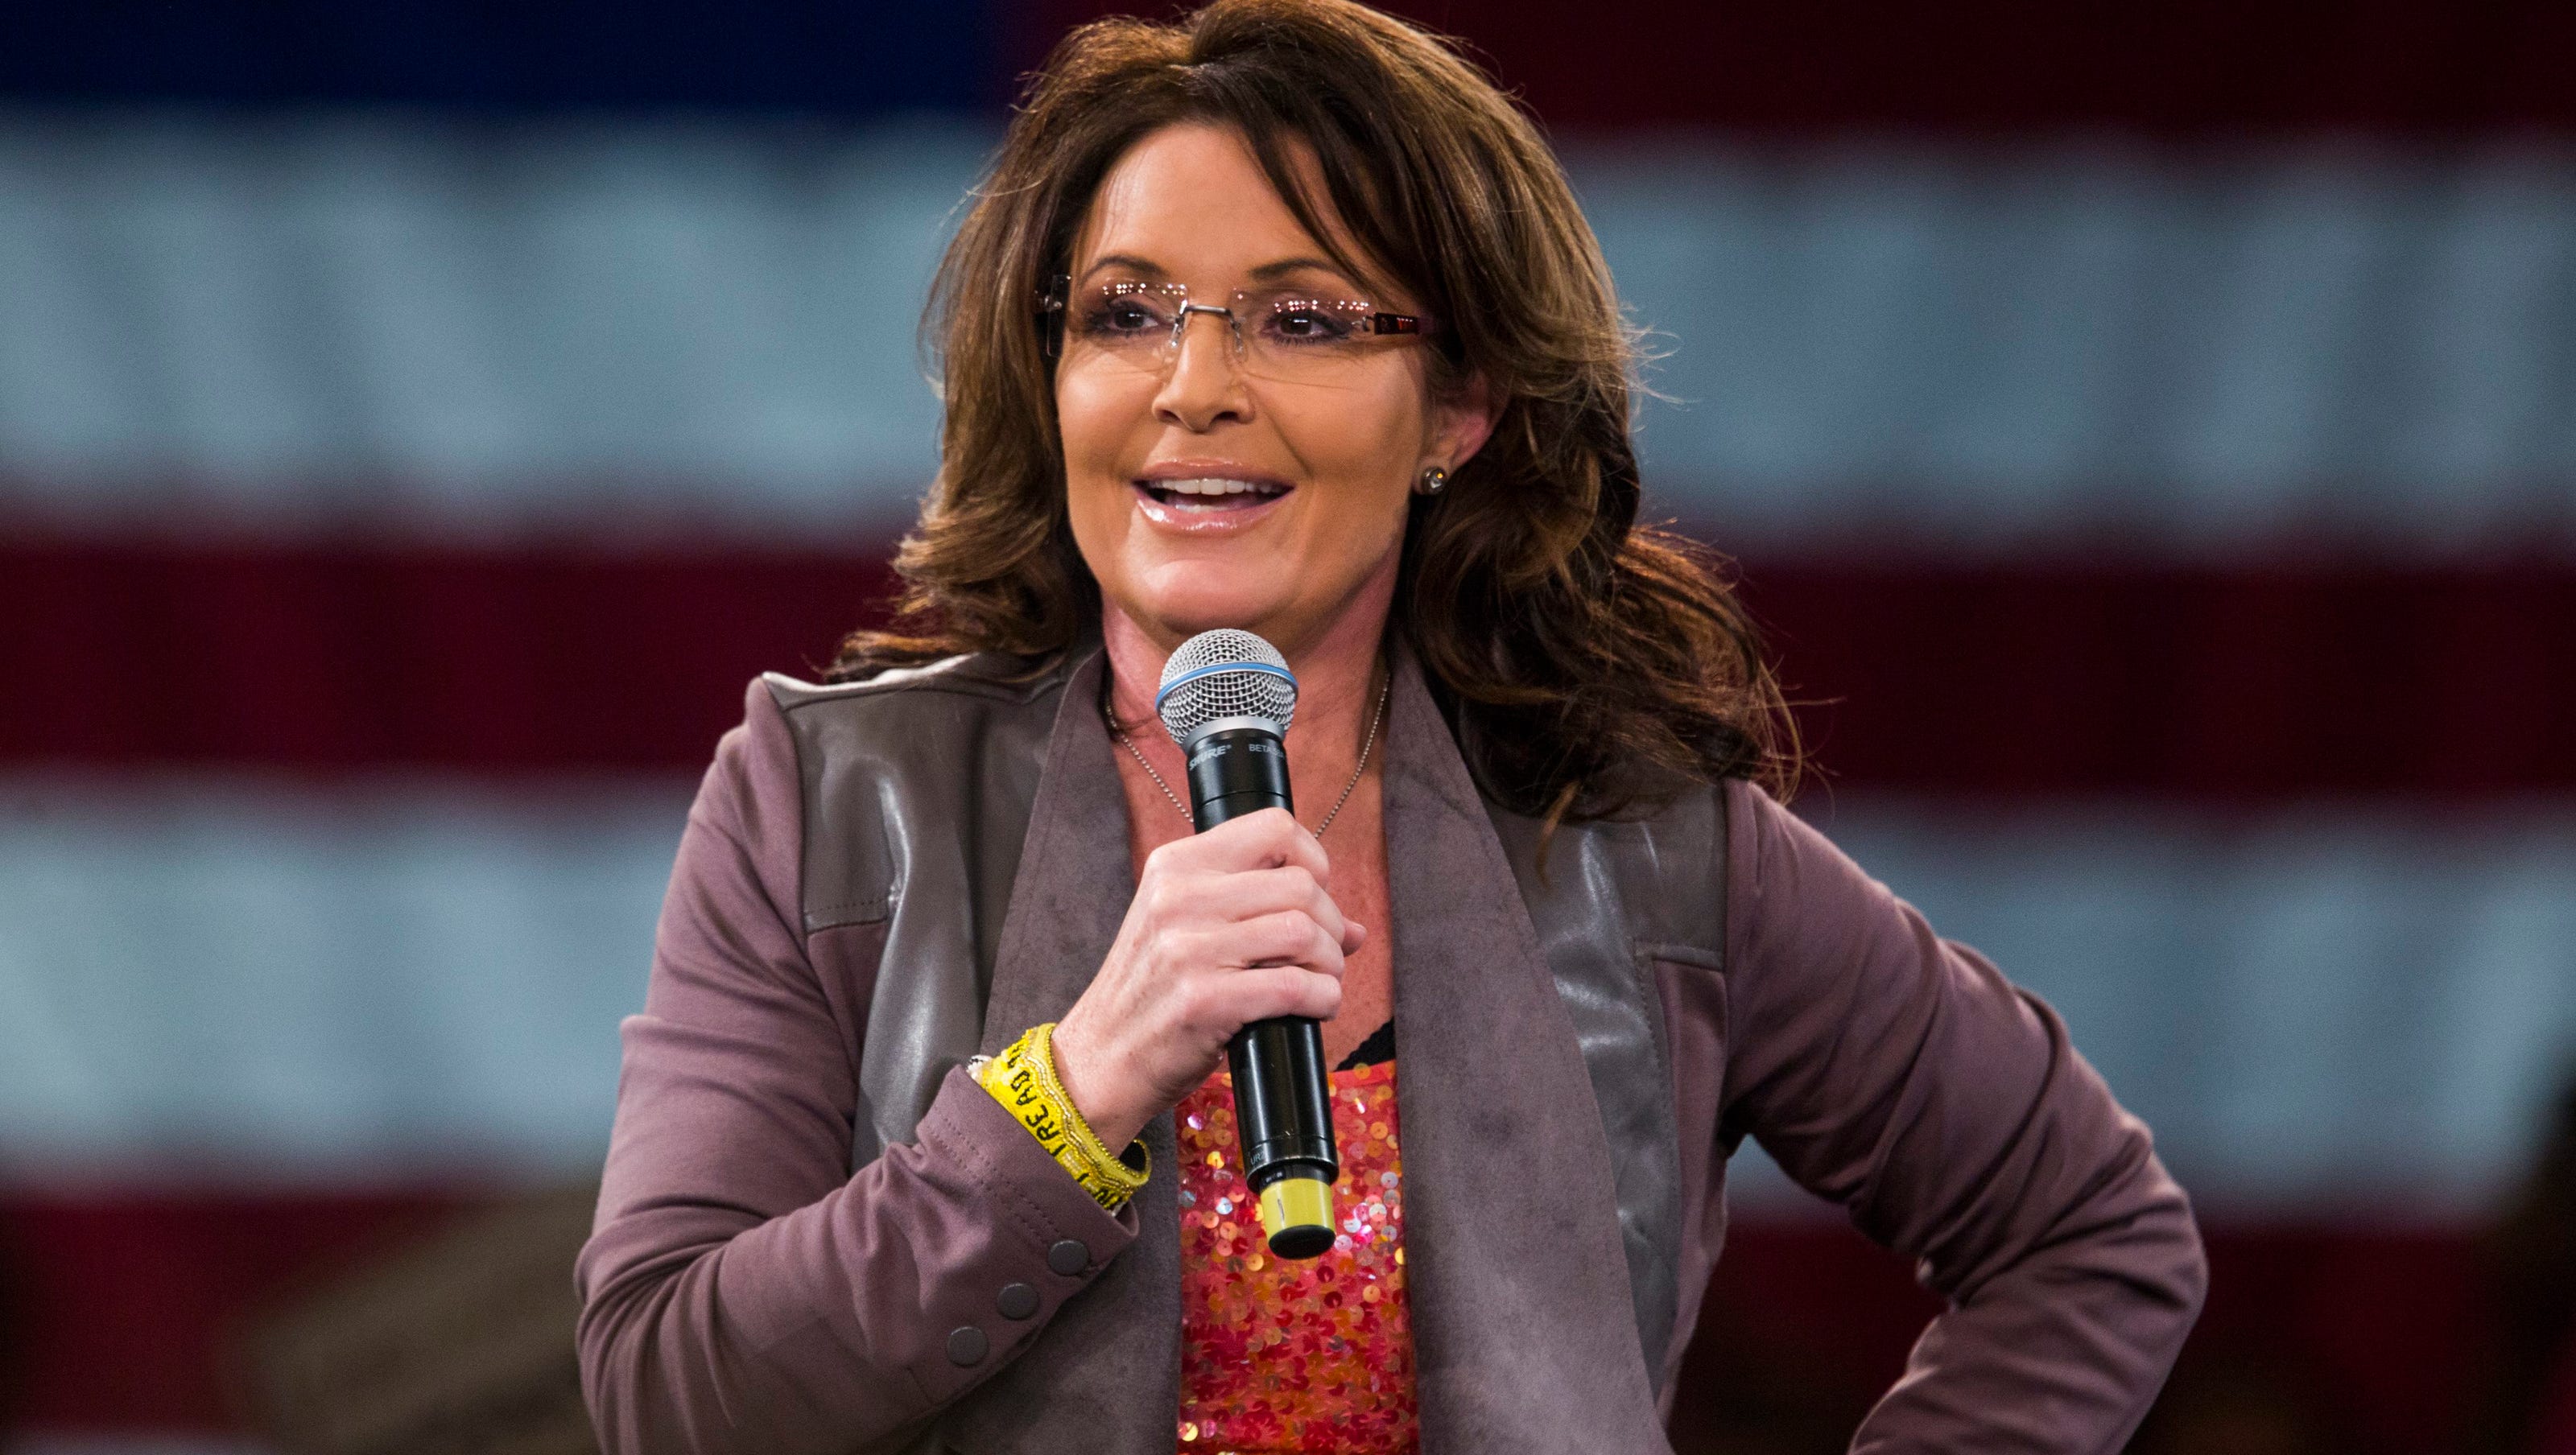 Sarah Palin to be a new 'Judge Judy' in courtroombased reality show